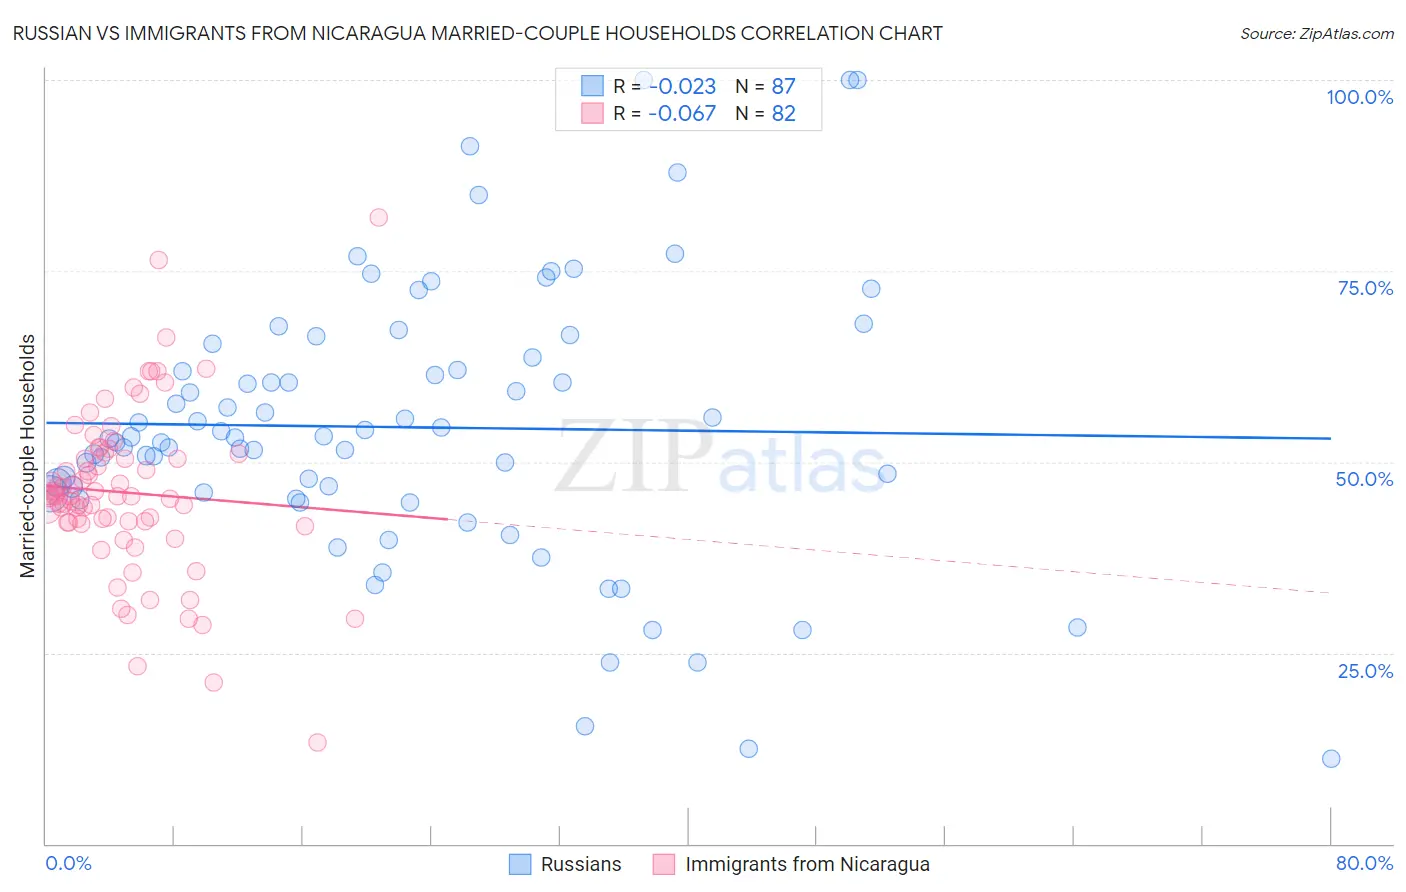 Russian vs Immigrants from Nicaragua Married-couple Households